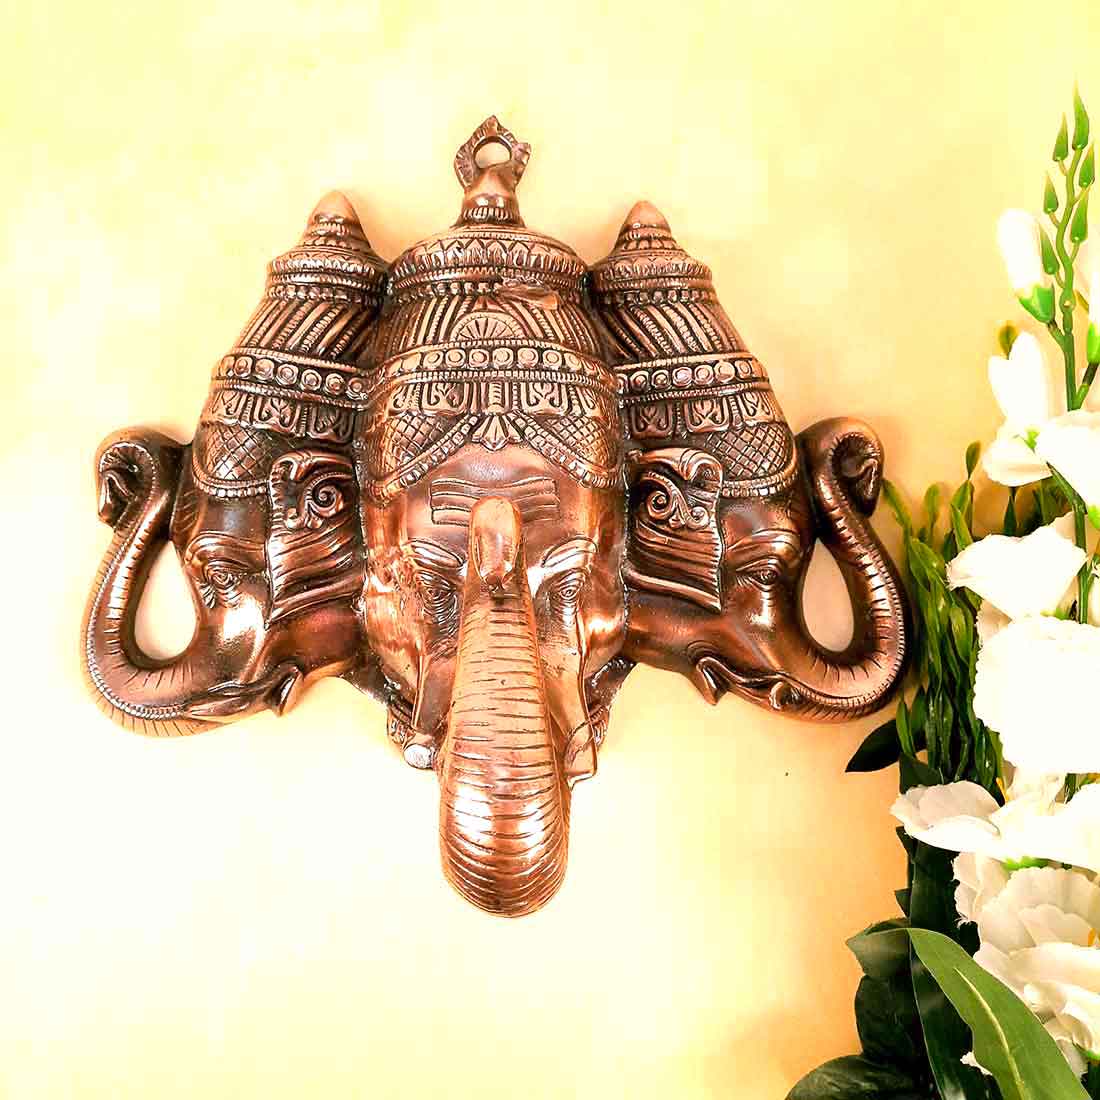 Ganesh Wall Hanging| Handcrafted 3 Face Ganesha Wall Art & Hangings for Gifts & Home Decor| Spiritual Sculpture and Religious Wall Mount Artwork | 16 Inch